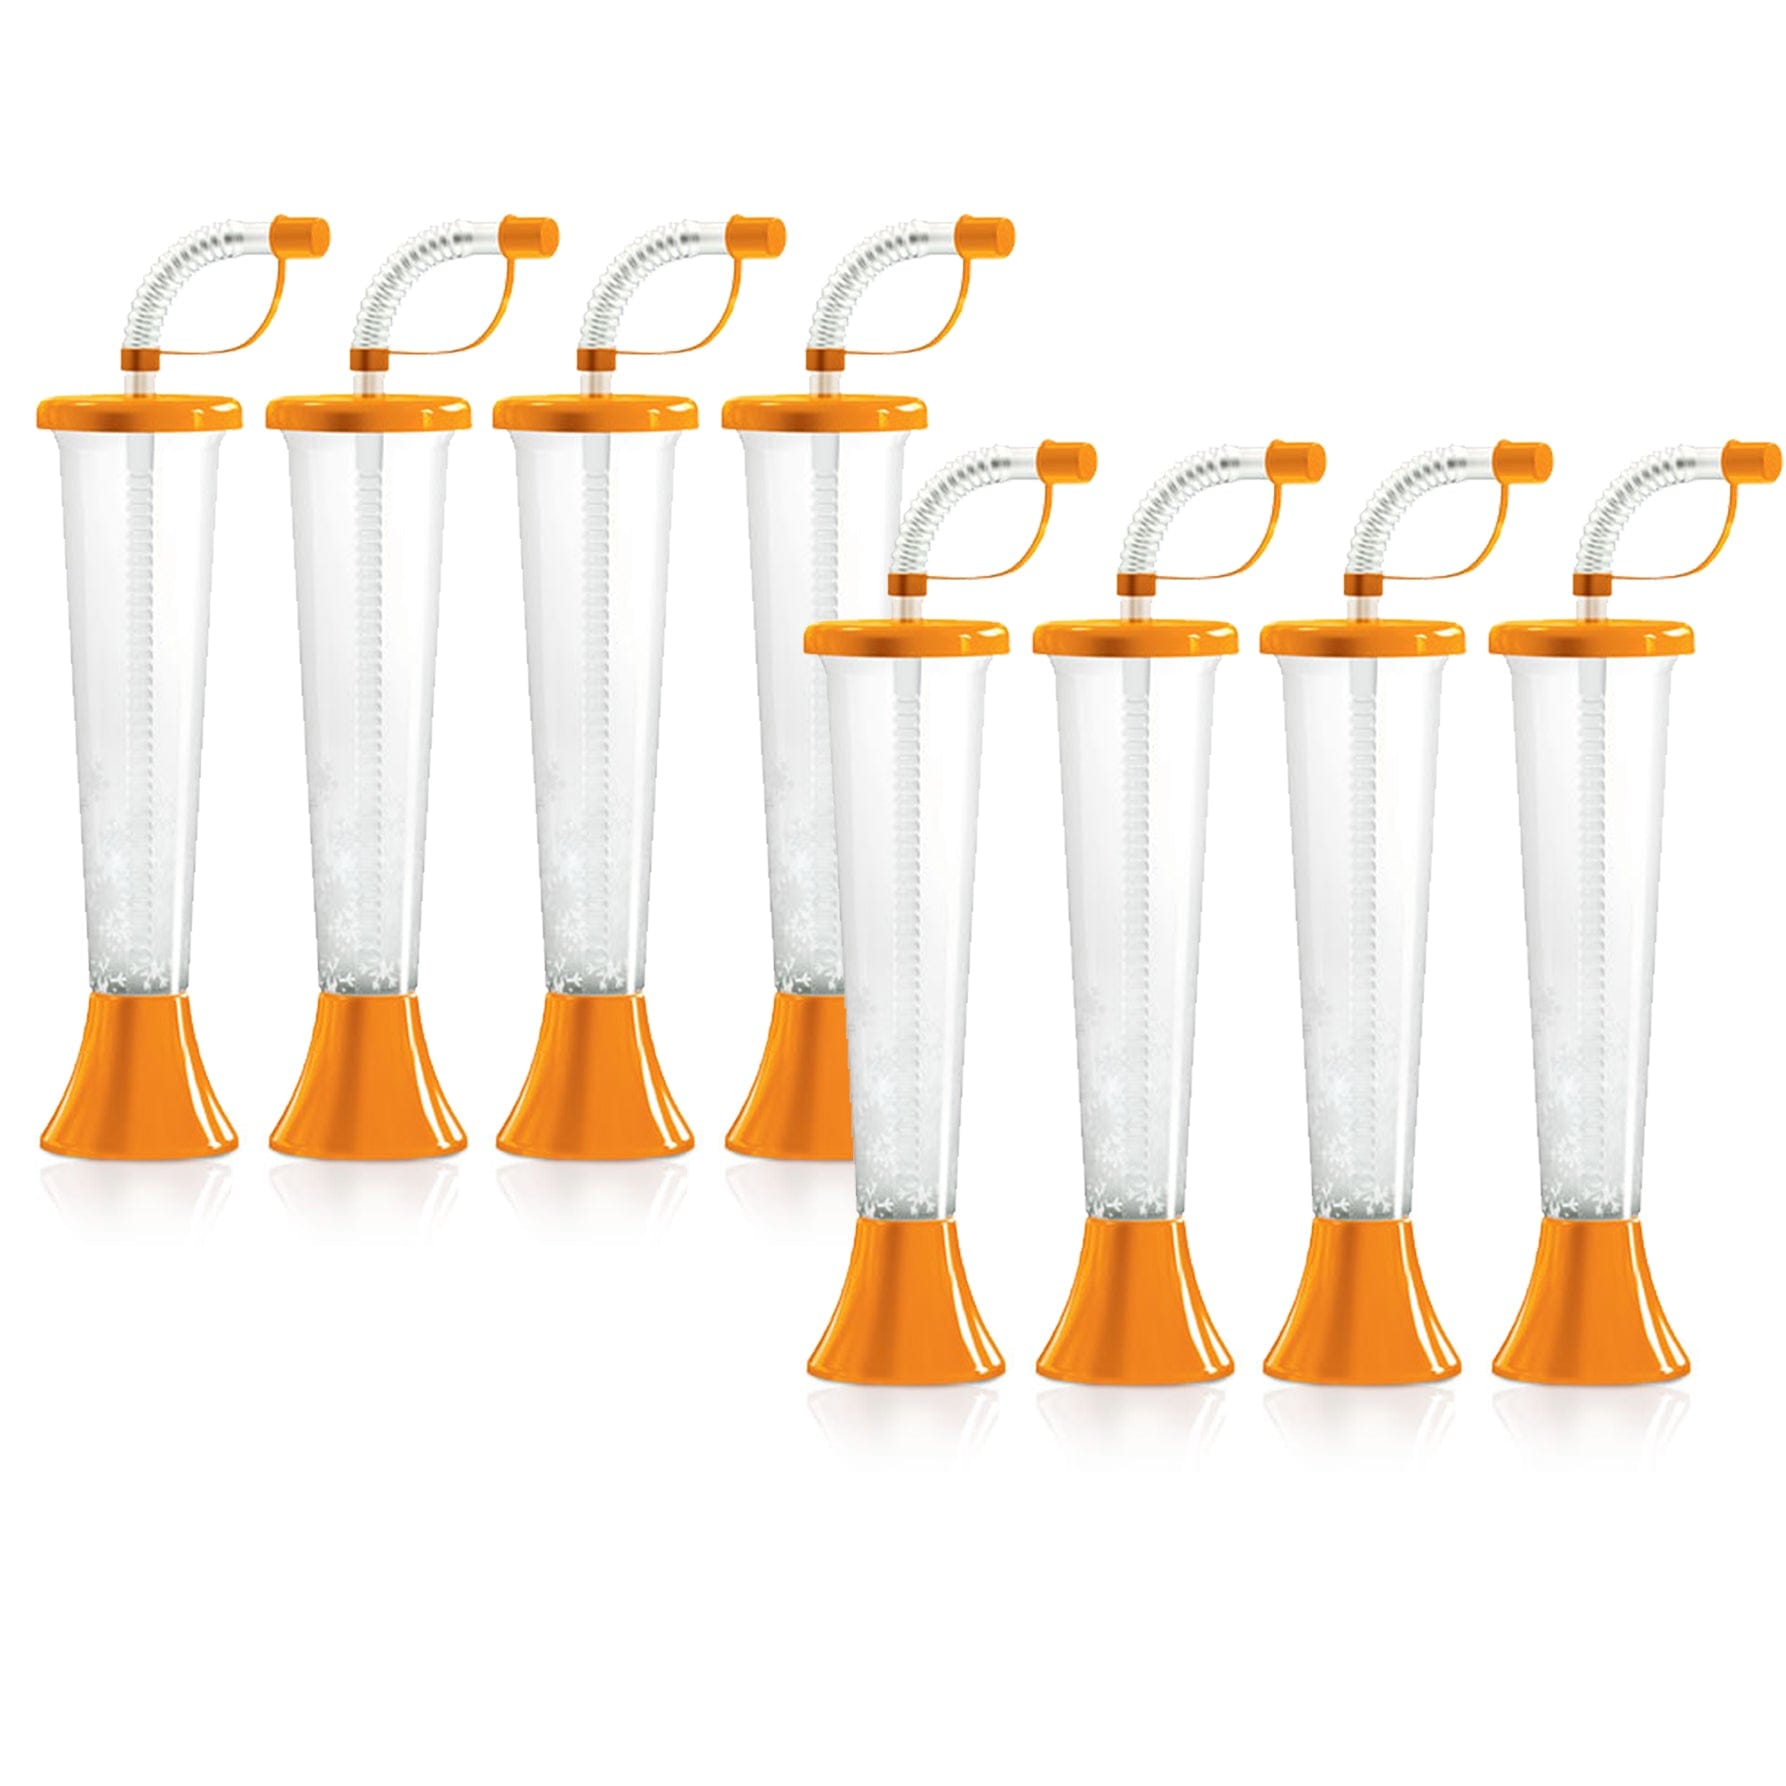 Sweet World USA Yard Cups Party Pack Yard Cups for Kids (108 ORANGE Cups) - for Cold Drinks, Frozen Drinks, Kids Parties - 9 oz. (250 ml) cups with lids and straws